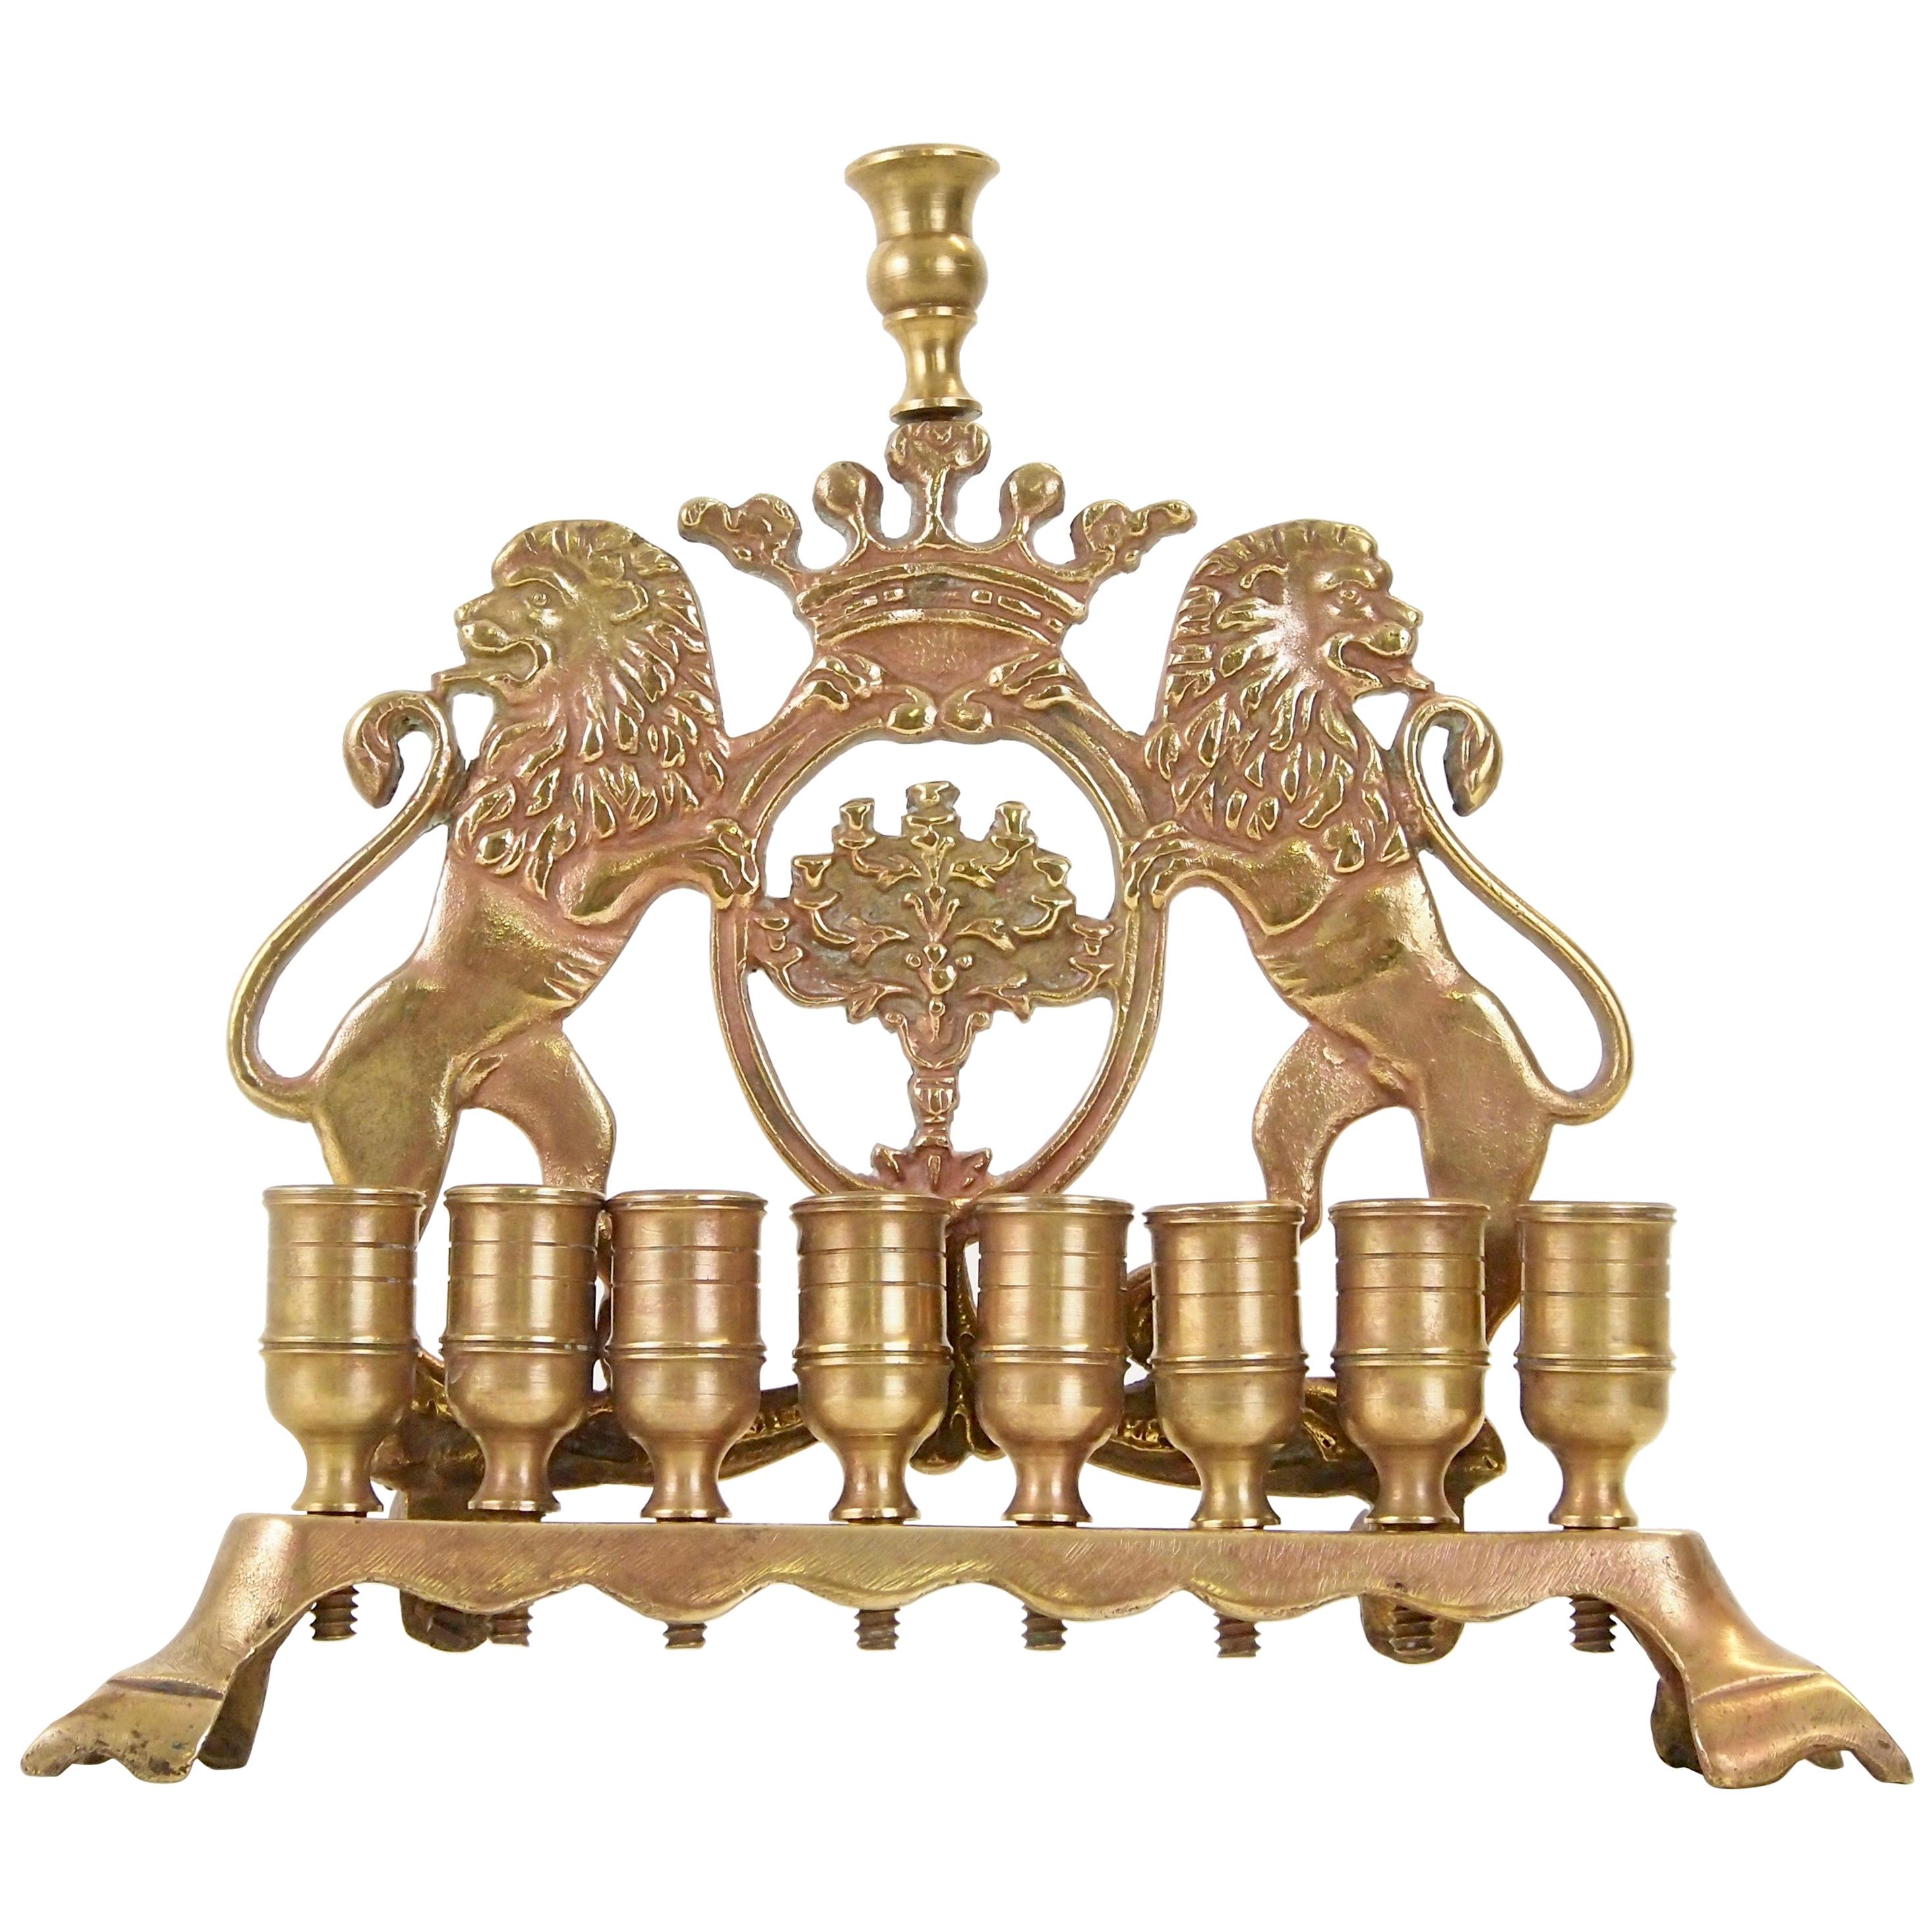 Antique Brass Chanukah Menora with Judicia Lions For Sale